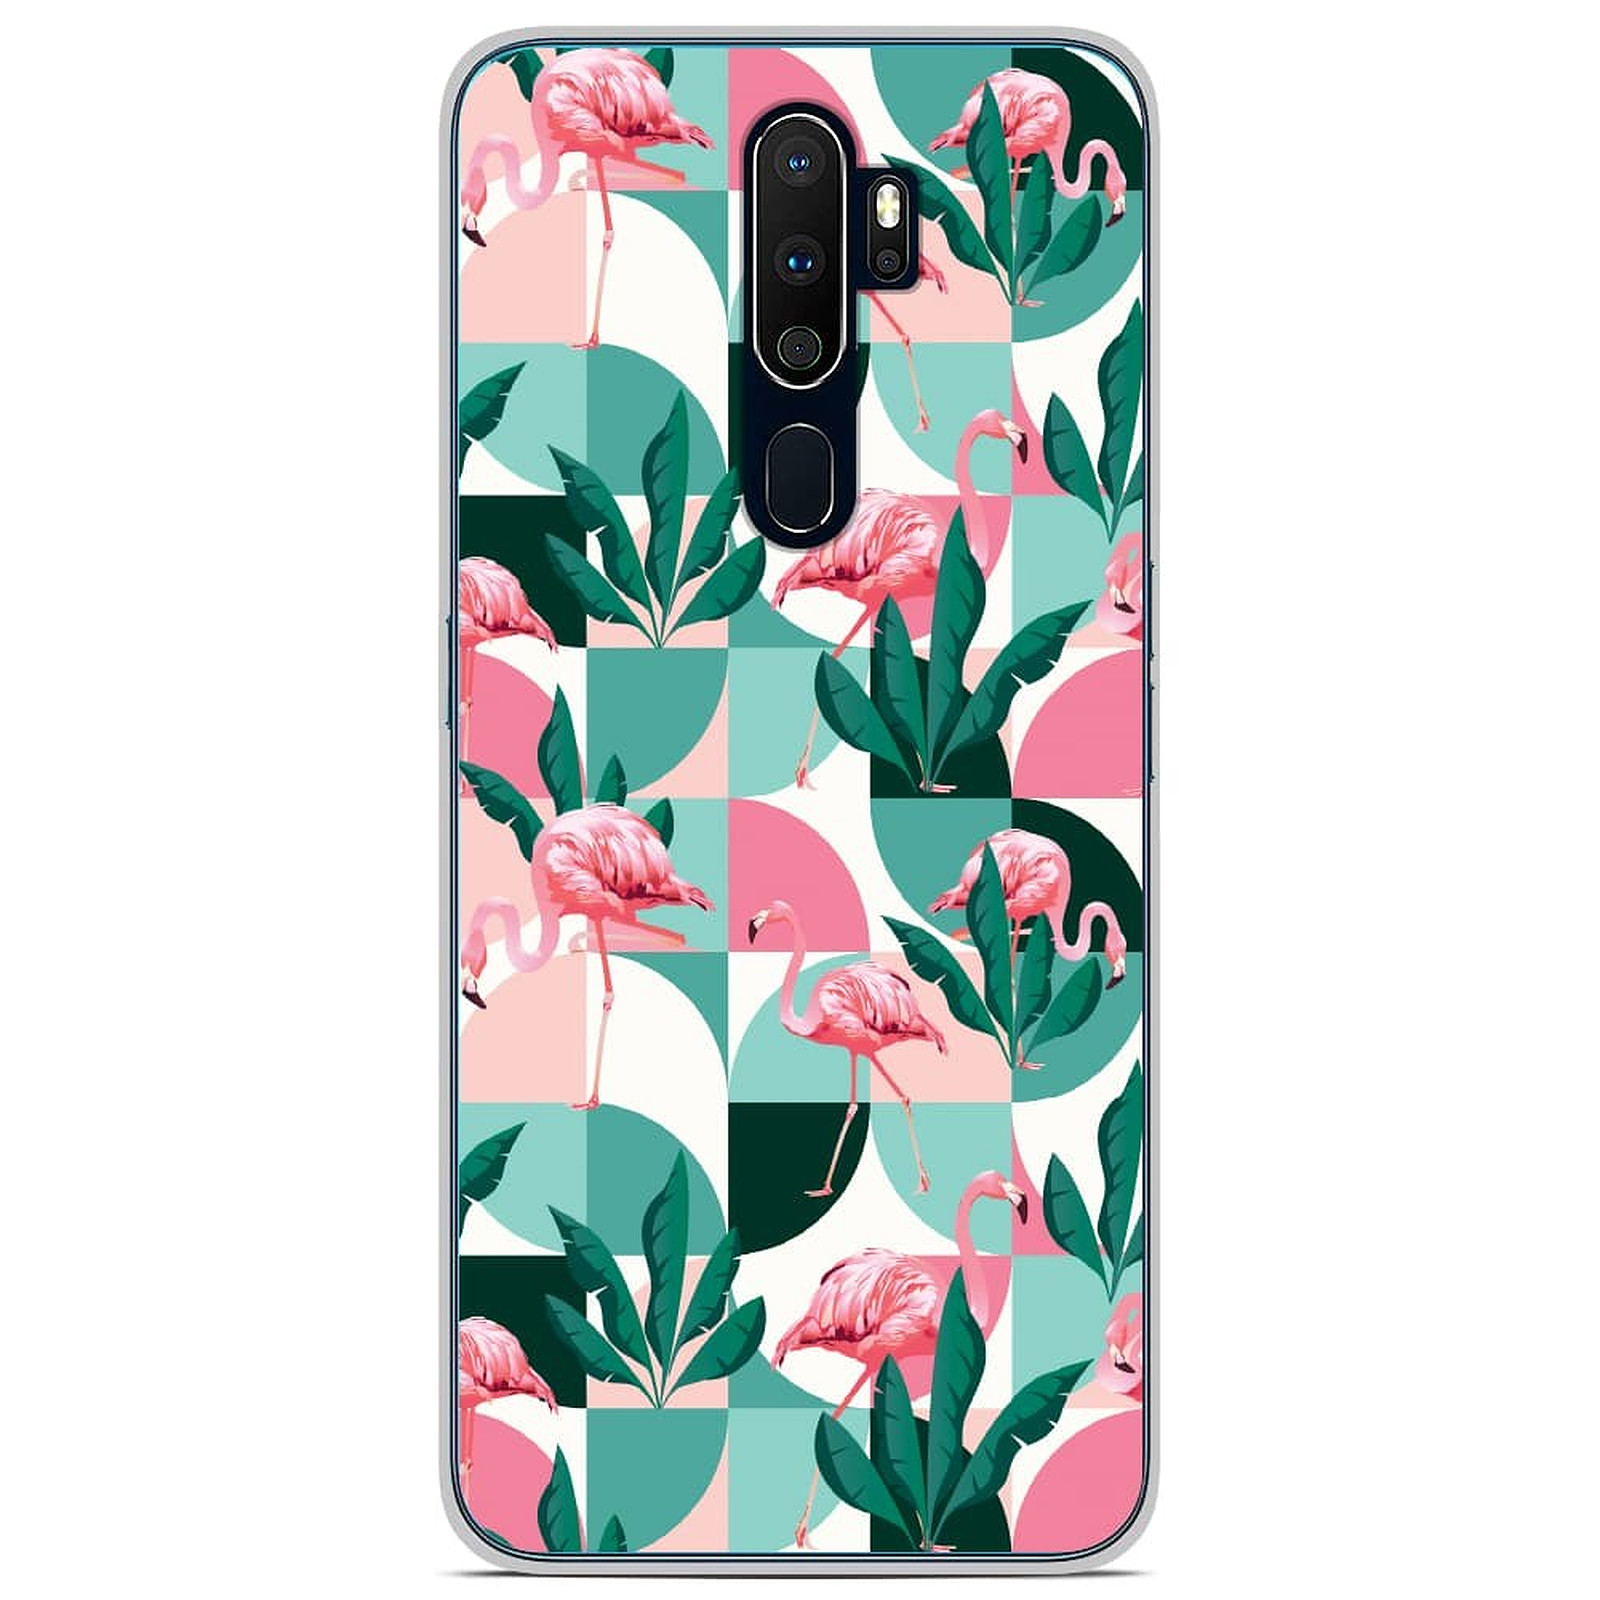 1001 Coques Coque silicone gel Oppo A9 2020 motif Flamants Roses ge´ome´trique - Coque telephone 1001Coques